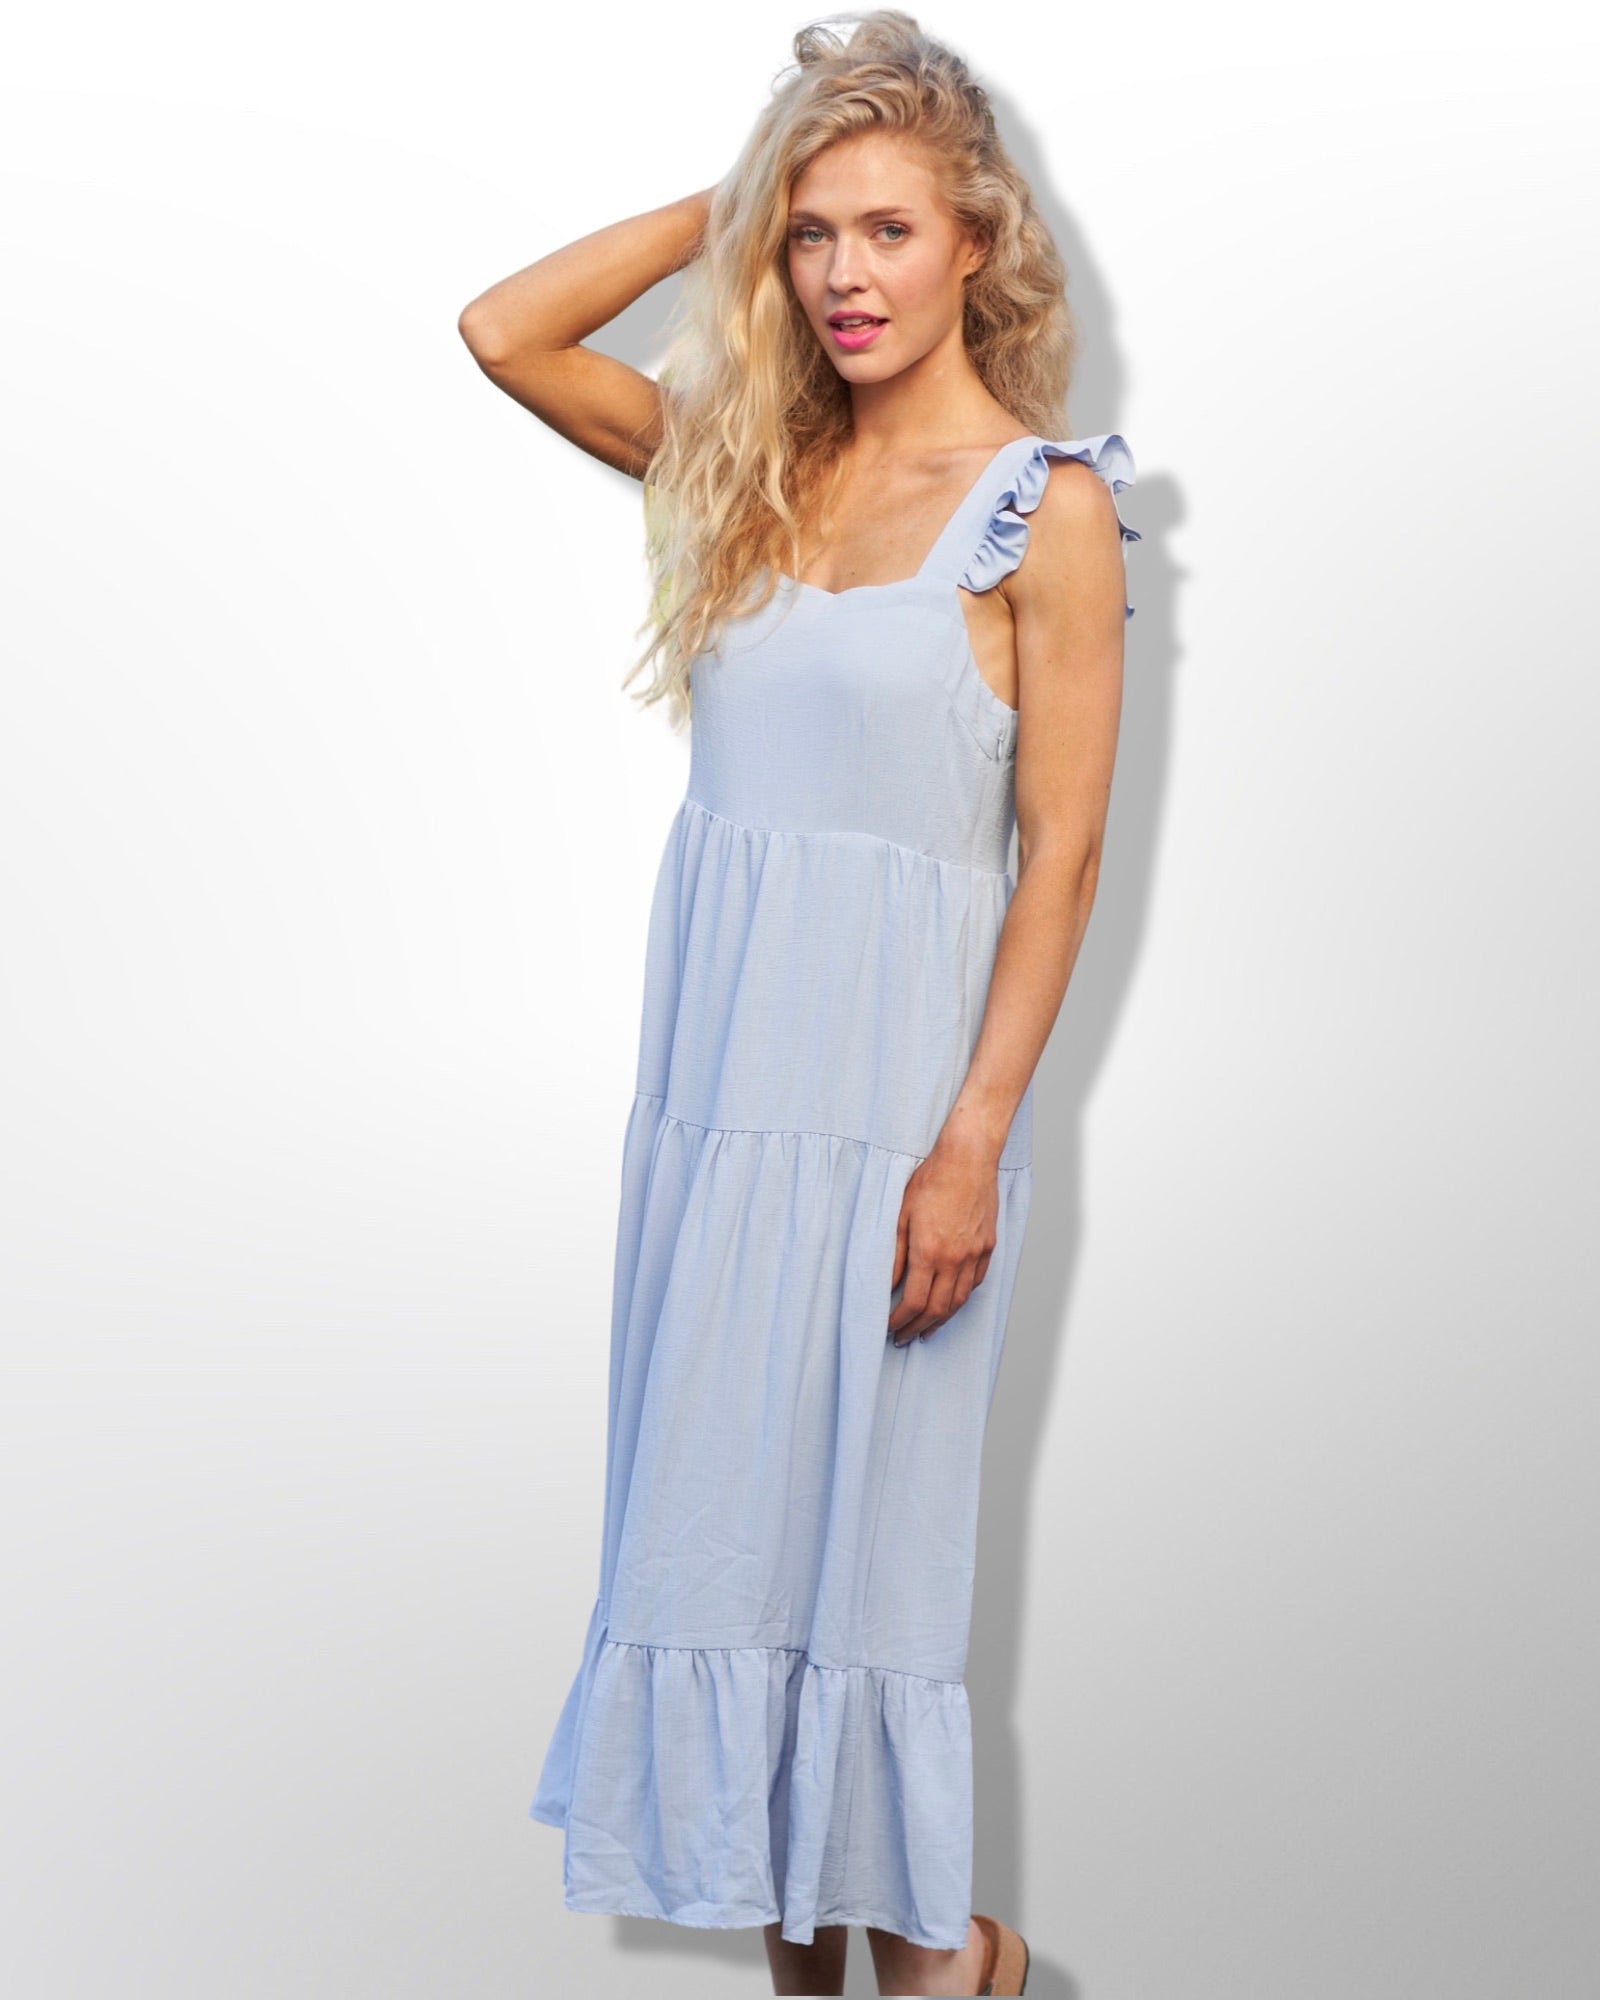 Sleeveless Maxi Dress for Women in Baby Blue Color